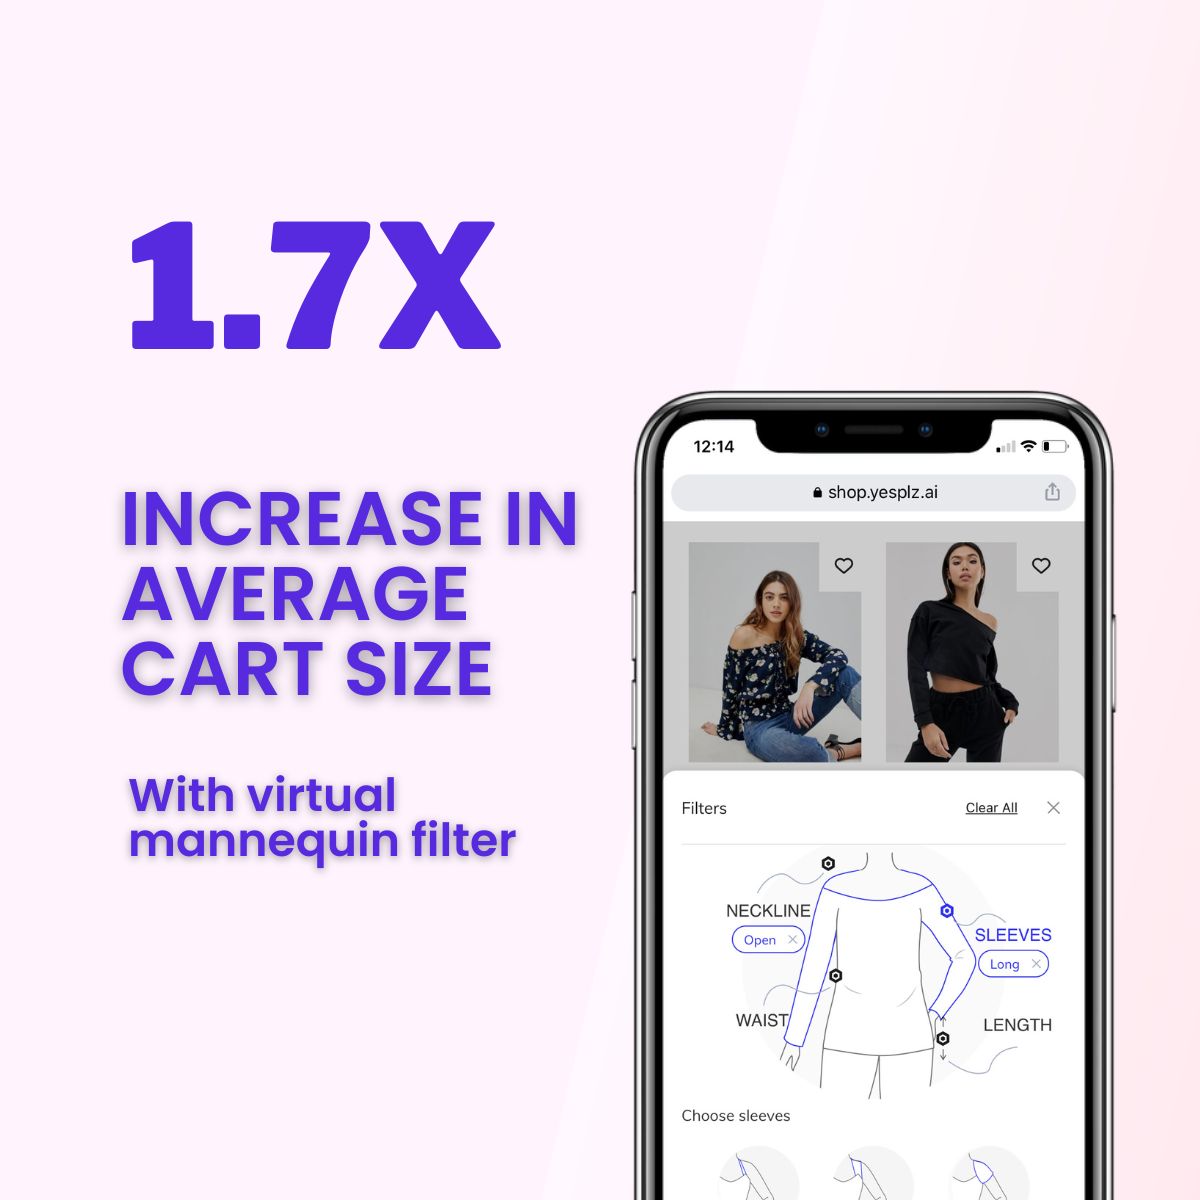 Average increase in cart size for shoppers using the Virtual Mannequin Filter